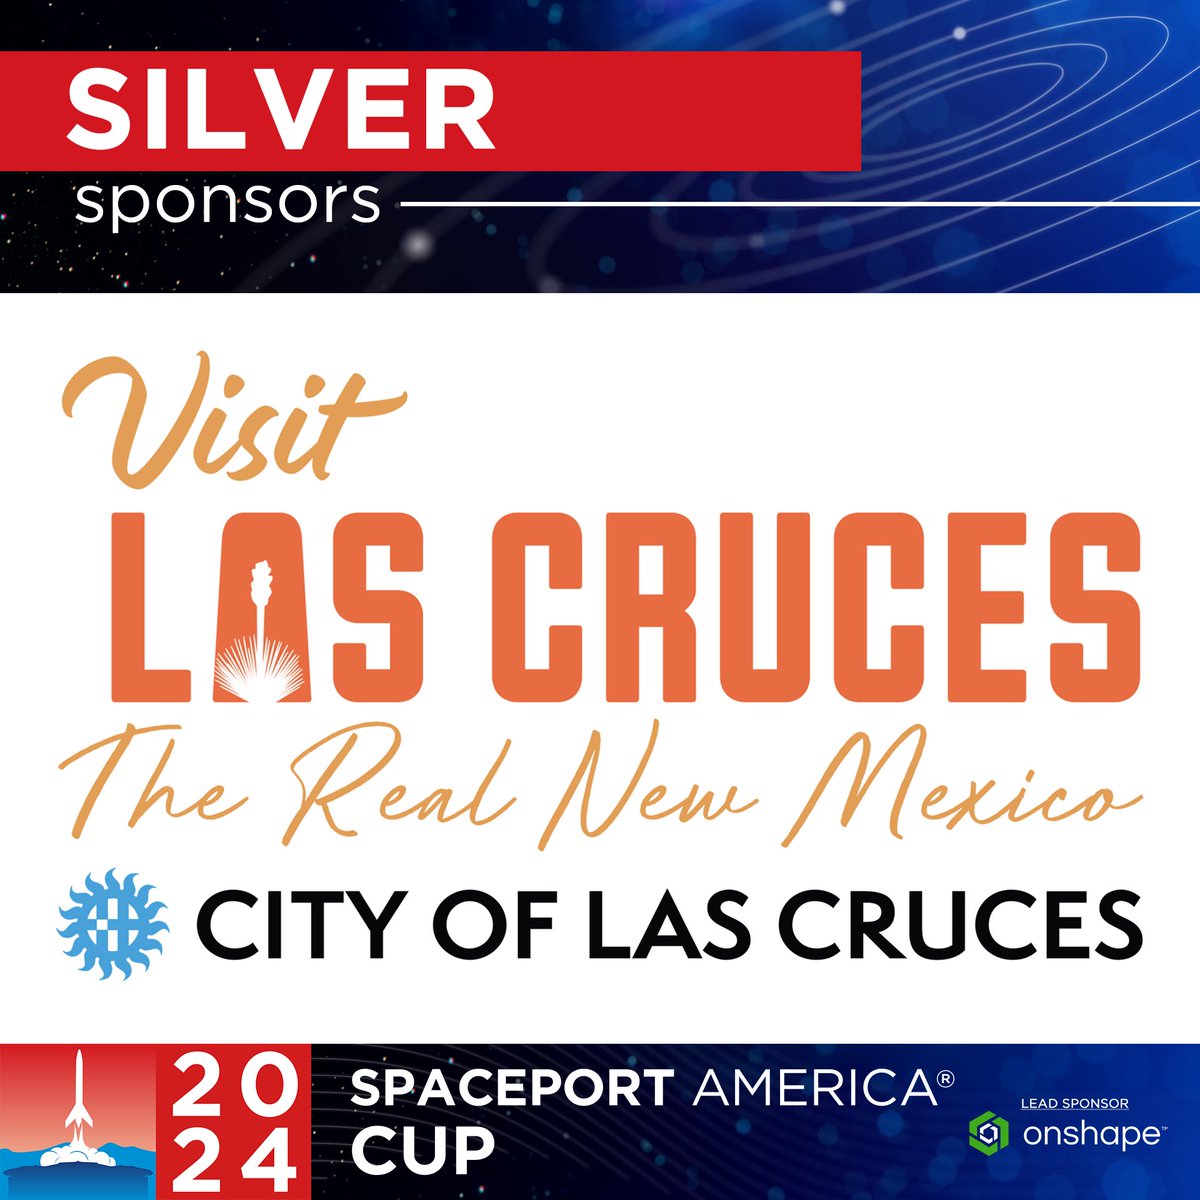 Visit Las Cruces - that's what thousands of student rocketeers from around the globe will be doing this June when they take part in the Cup! A HUGE thanks to @VisitLasCruces for signing on as a sponsor for this year's Cup 🚀 Learn more | bit.ly/49YkxMC